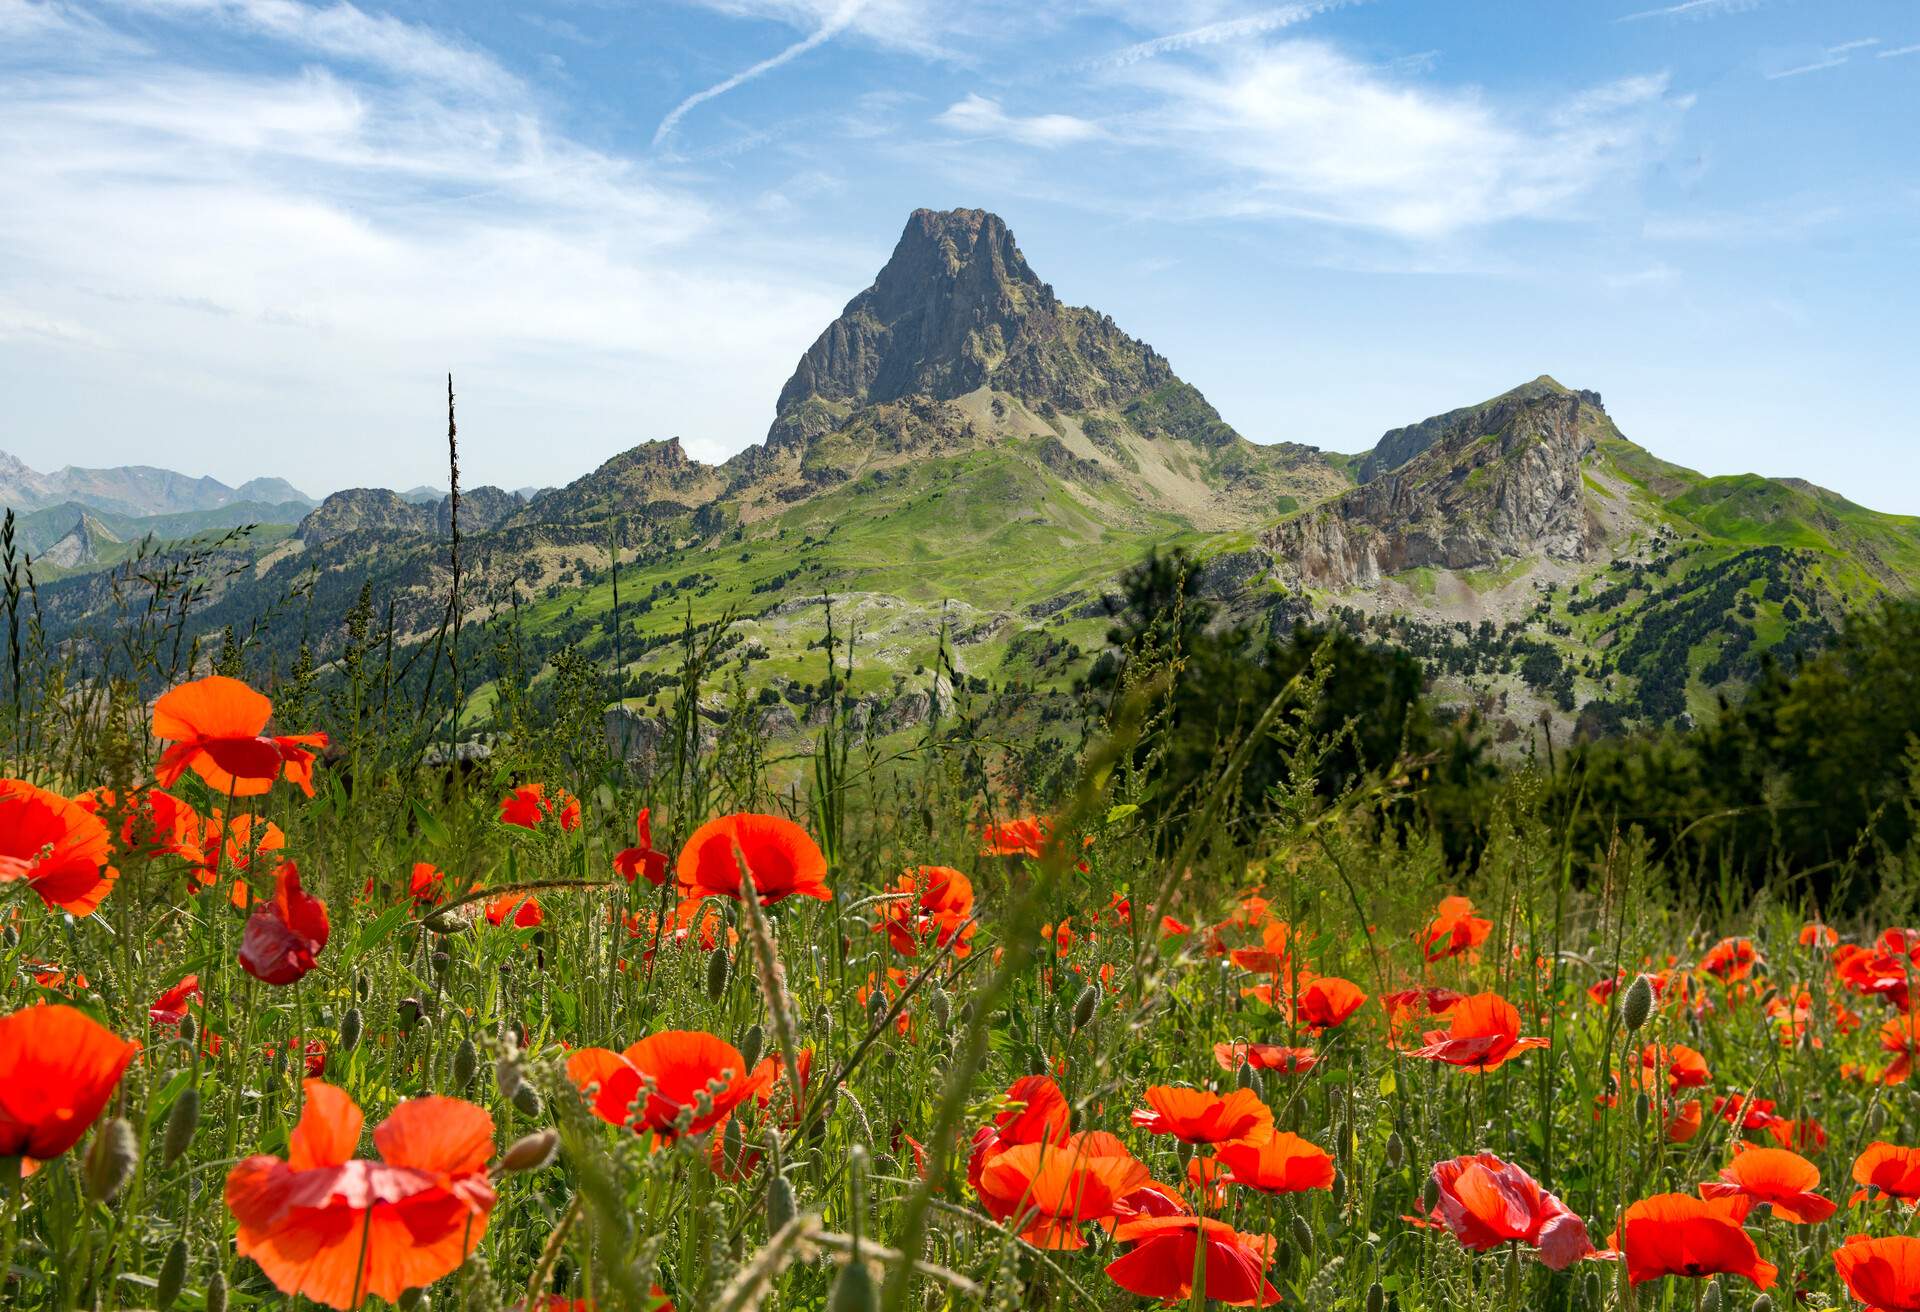 View of the Pic du Midi d'Ossau in the French Pyrenees, with field of poppies